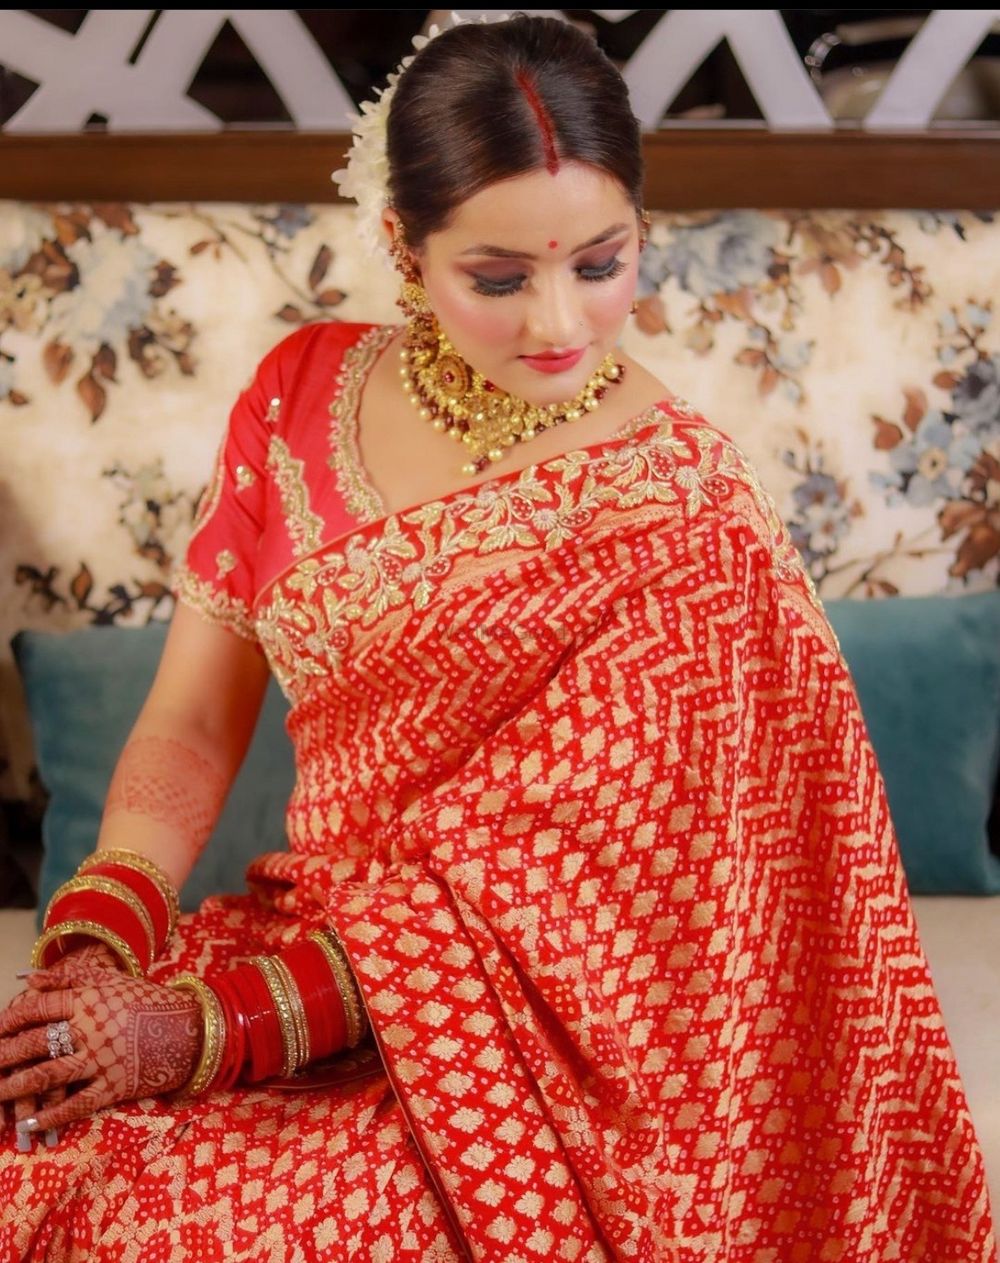 Photo From "Bridal Beauty" X Aanchal - By Alka Kohli Makeovers